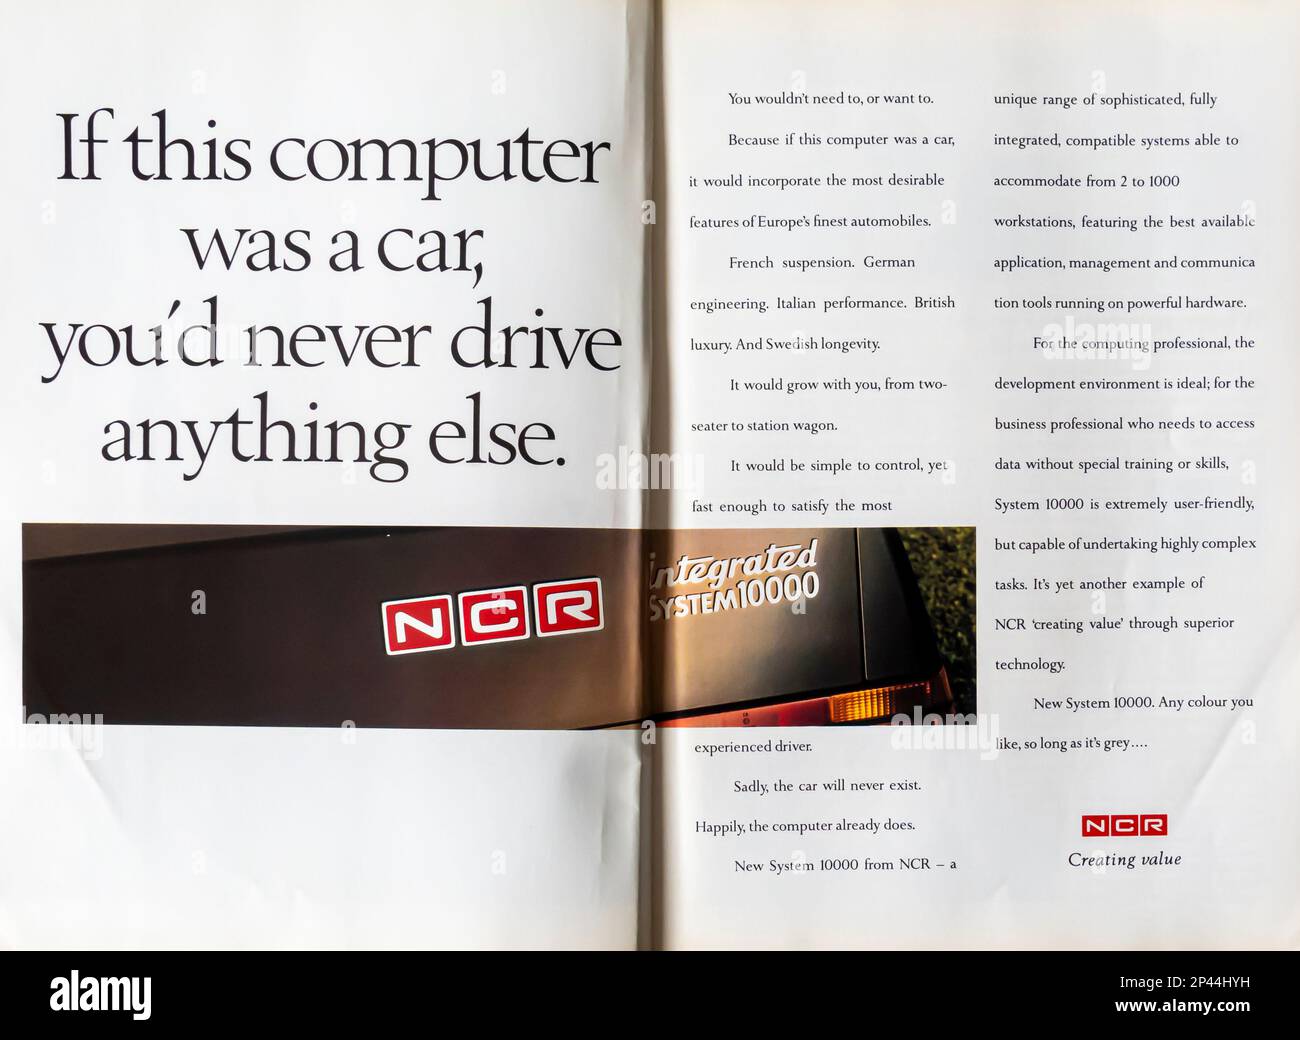 NCR integrated systems advert in a Natgeo magazine May 1988 Stock Photo